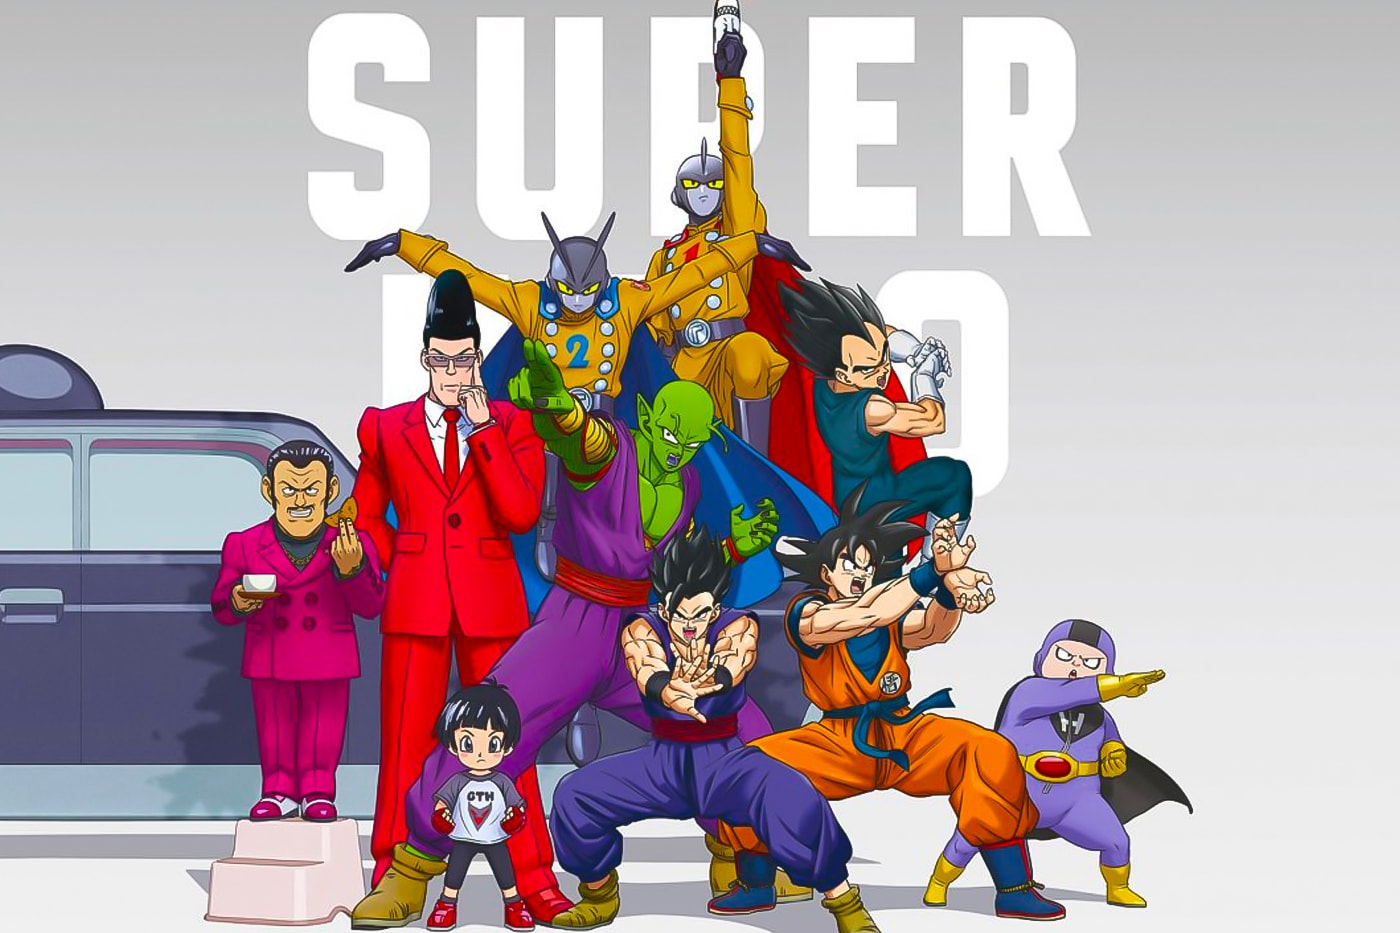 The Trailer for 'Dragon Ball Super: Super Hero' Teases a Release Date